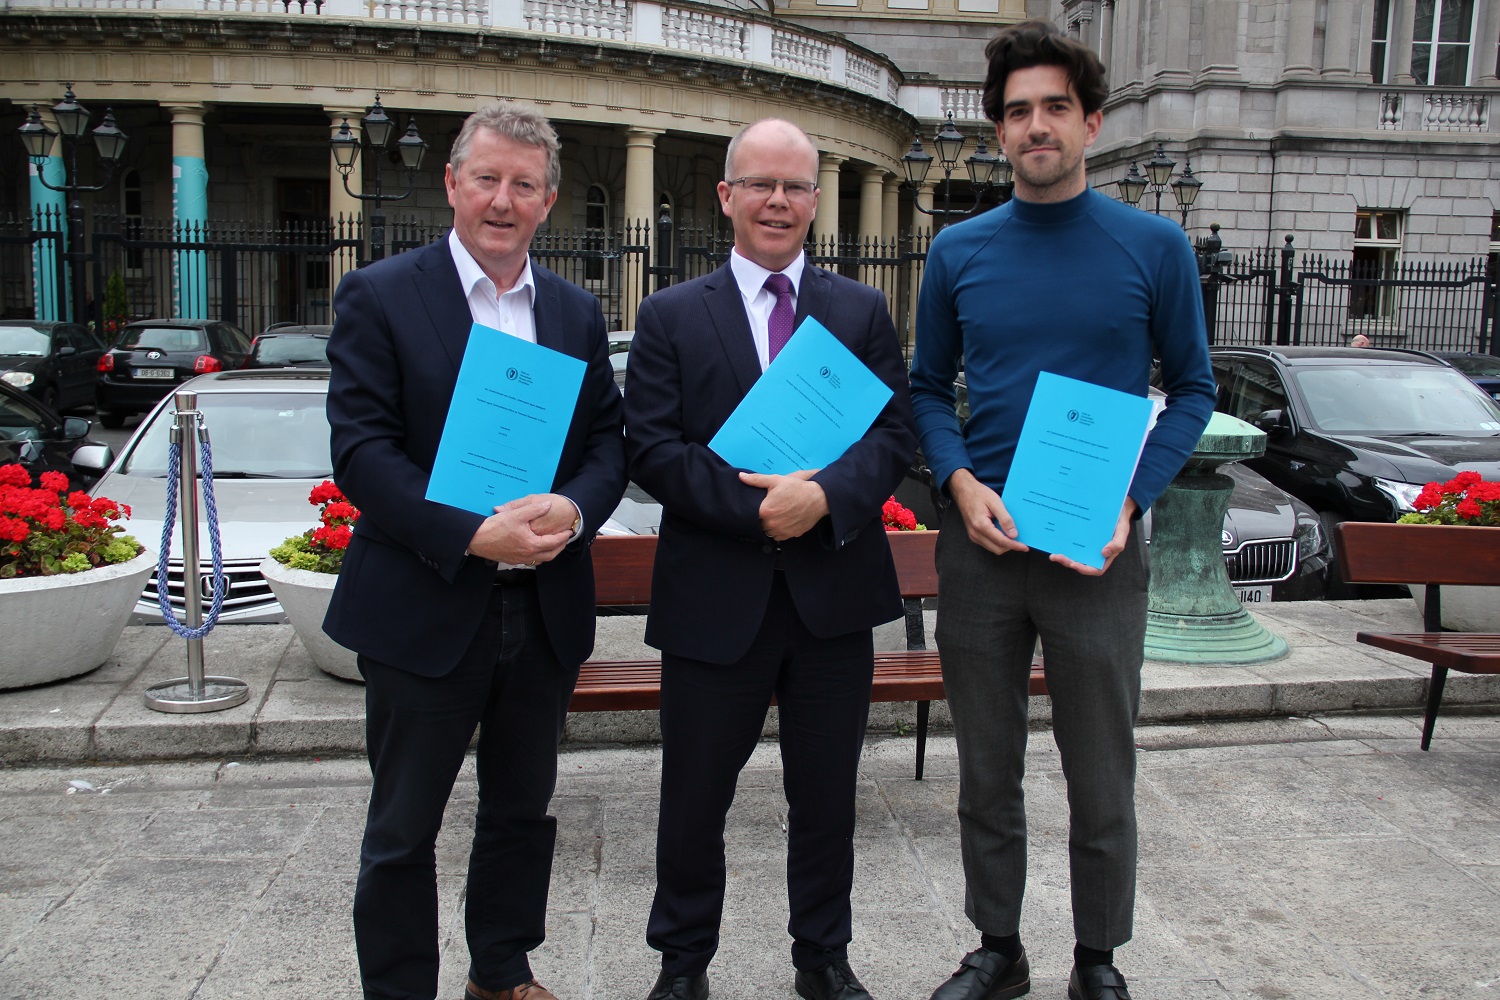 Members of the Committee on Culture, Heritage and the Gaeltacht